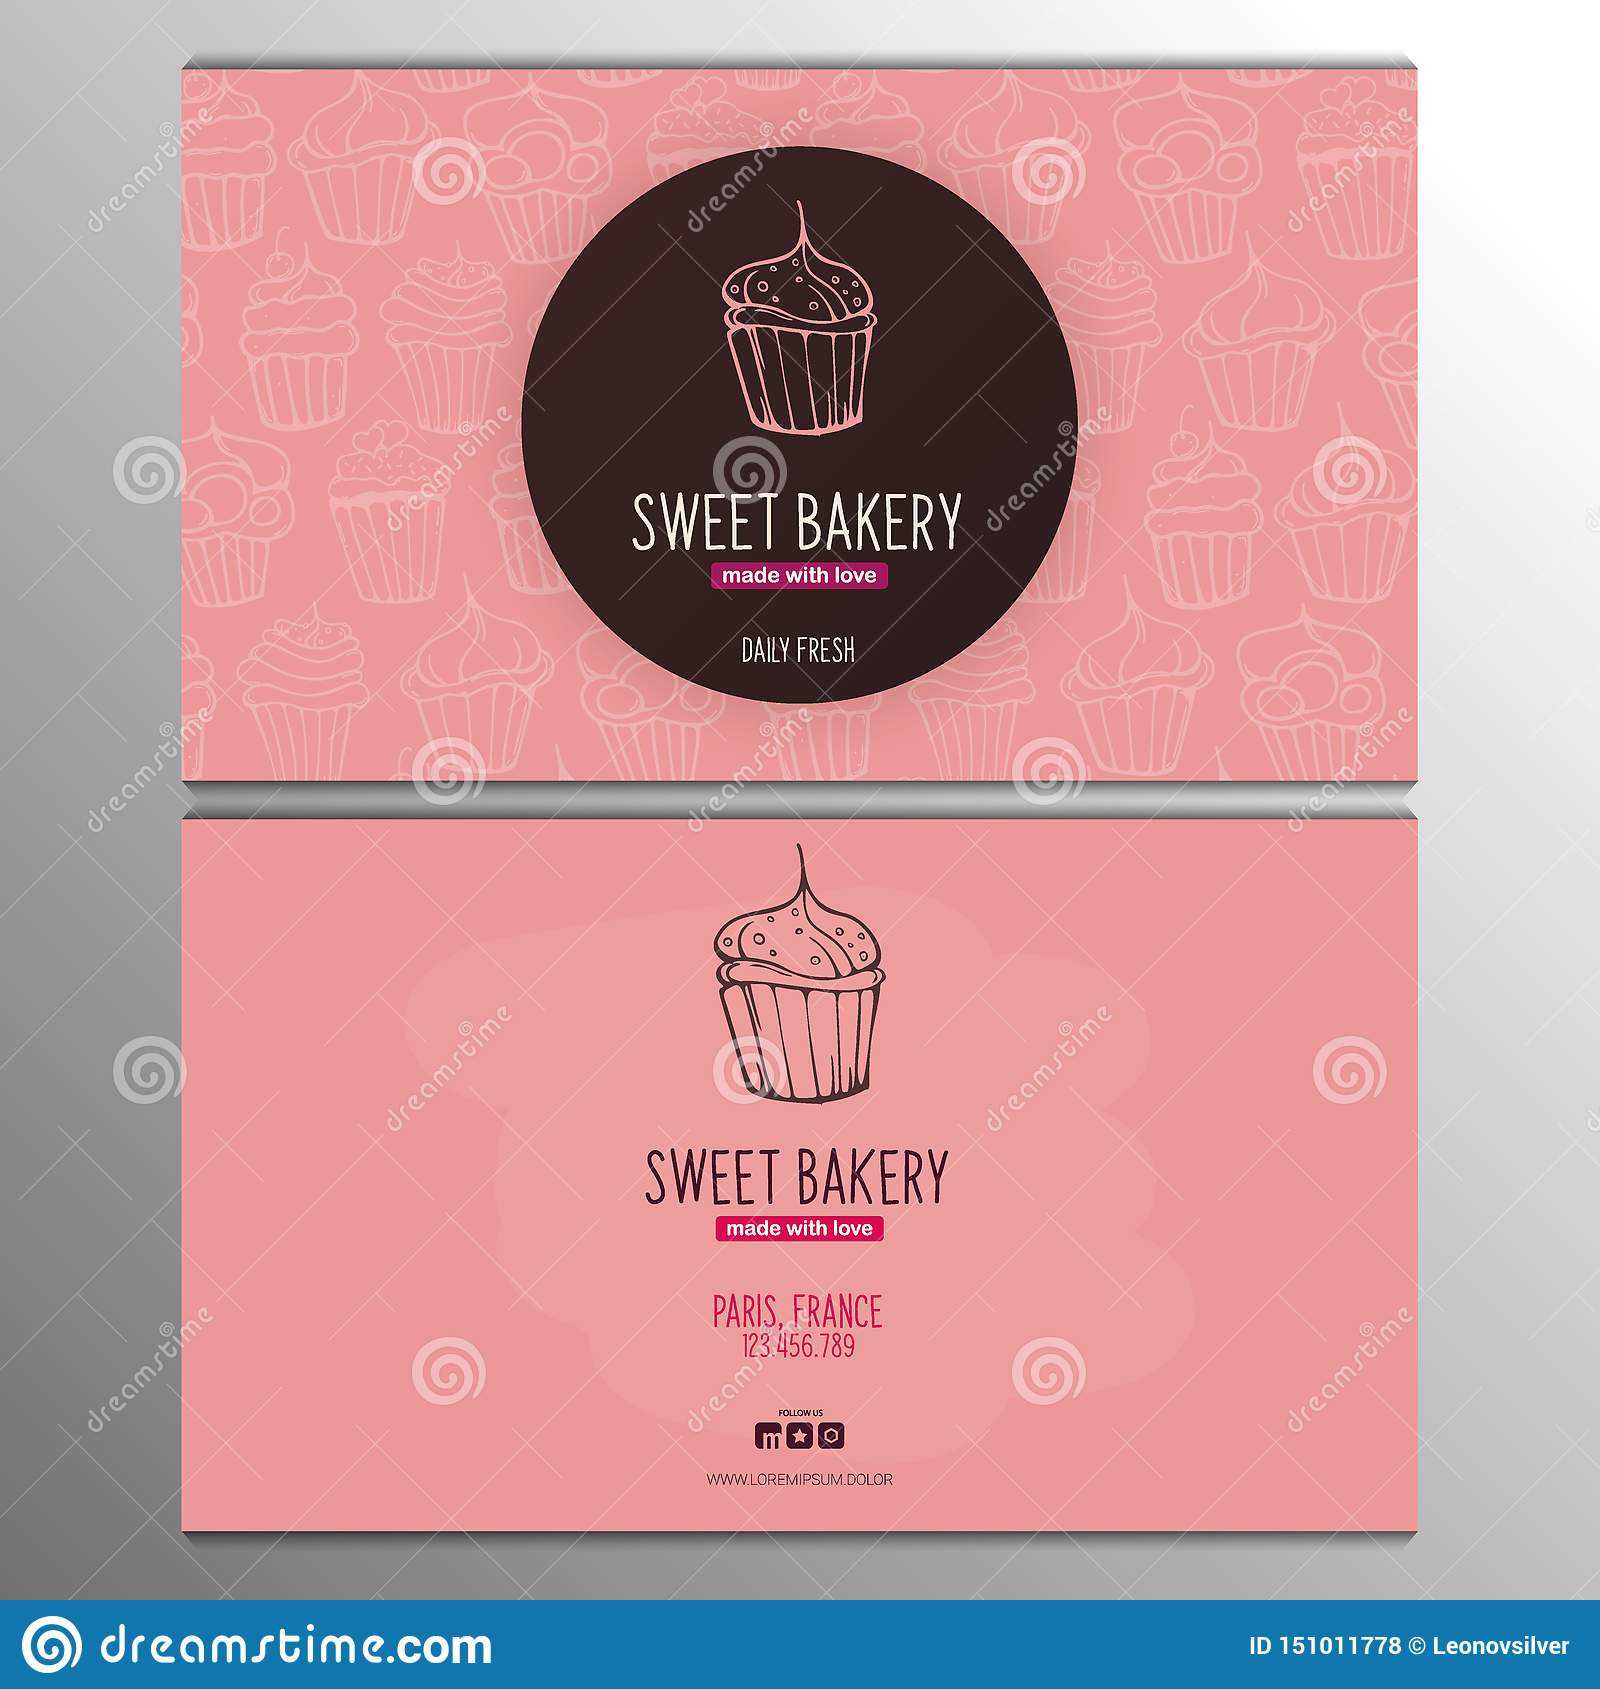 Cupcake Or Cake Business Card Template For Bakery Or Pastry Intended For Cake Business Cards Templates Free